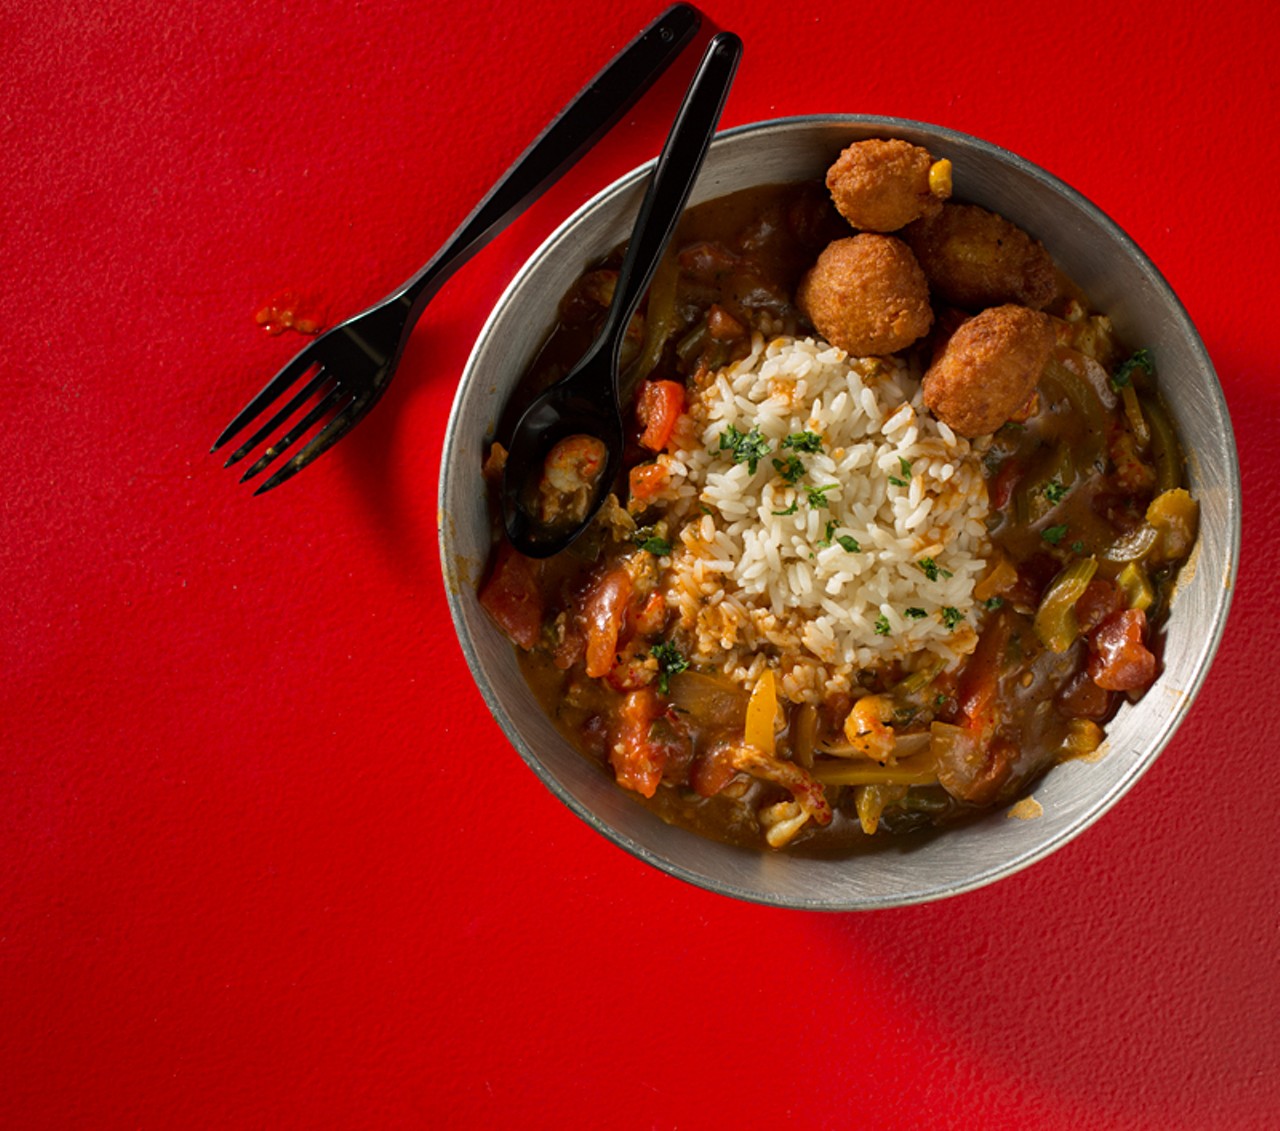 Etouffee is a creole dish with peppers, onions, celery. Here, it's shown with crawfish, and served over a bed of rice.